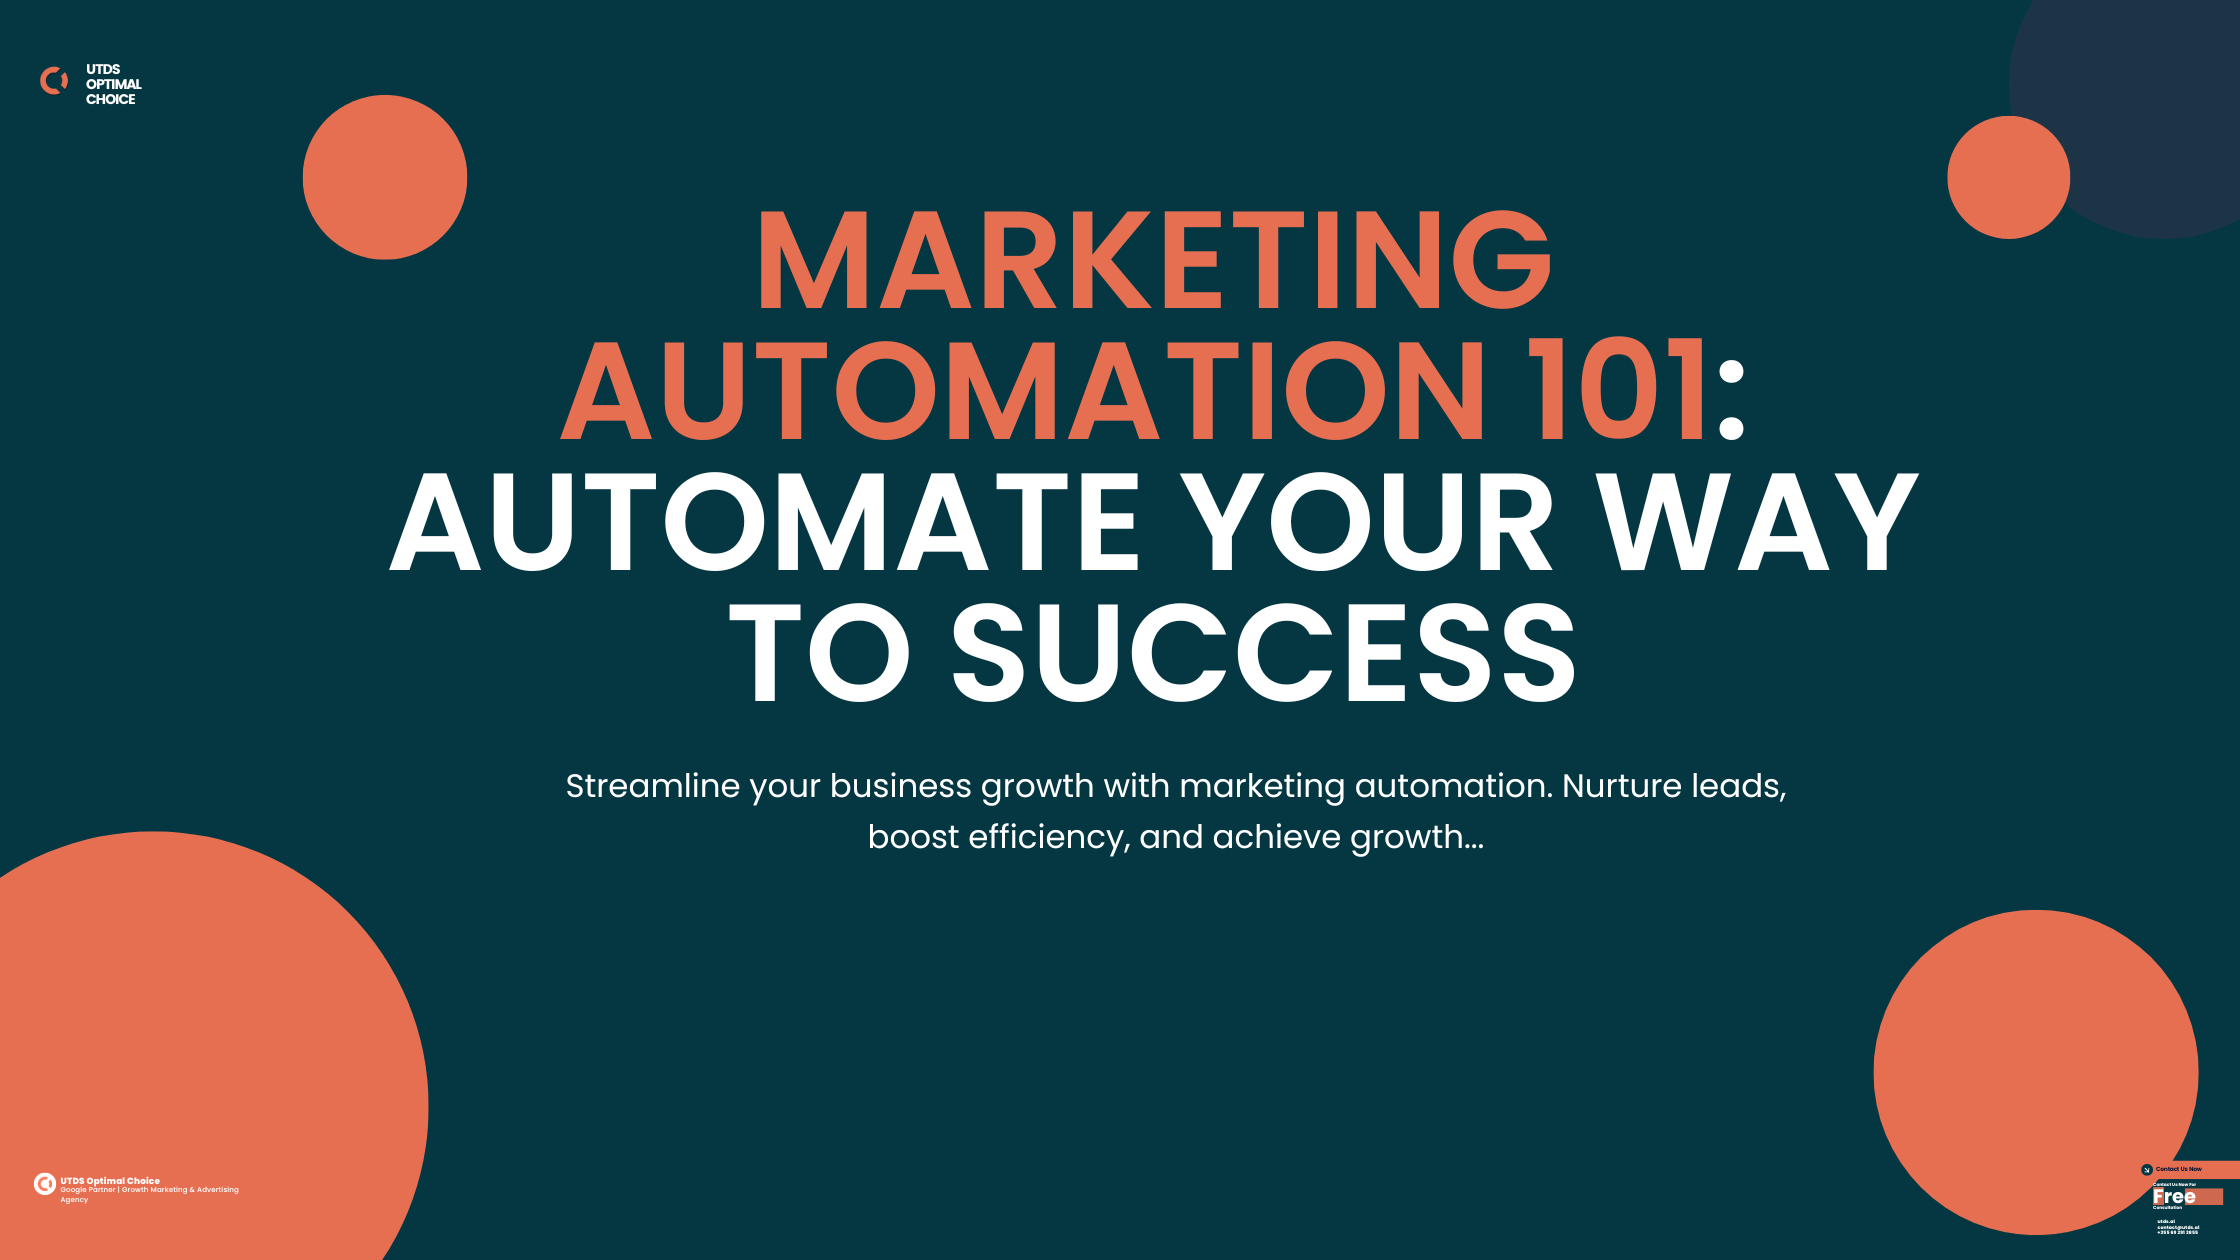 Marketing Automation 101: Automate Your Way to Success